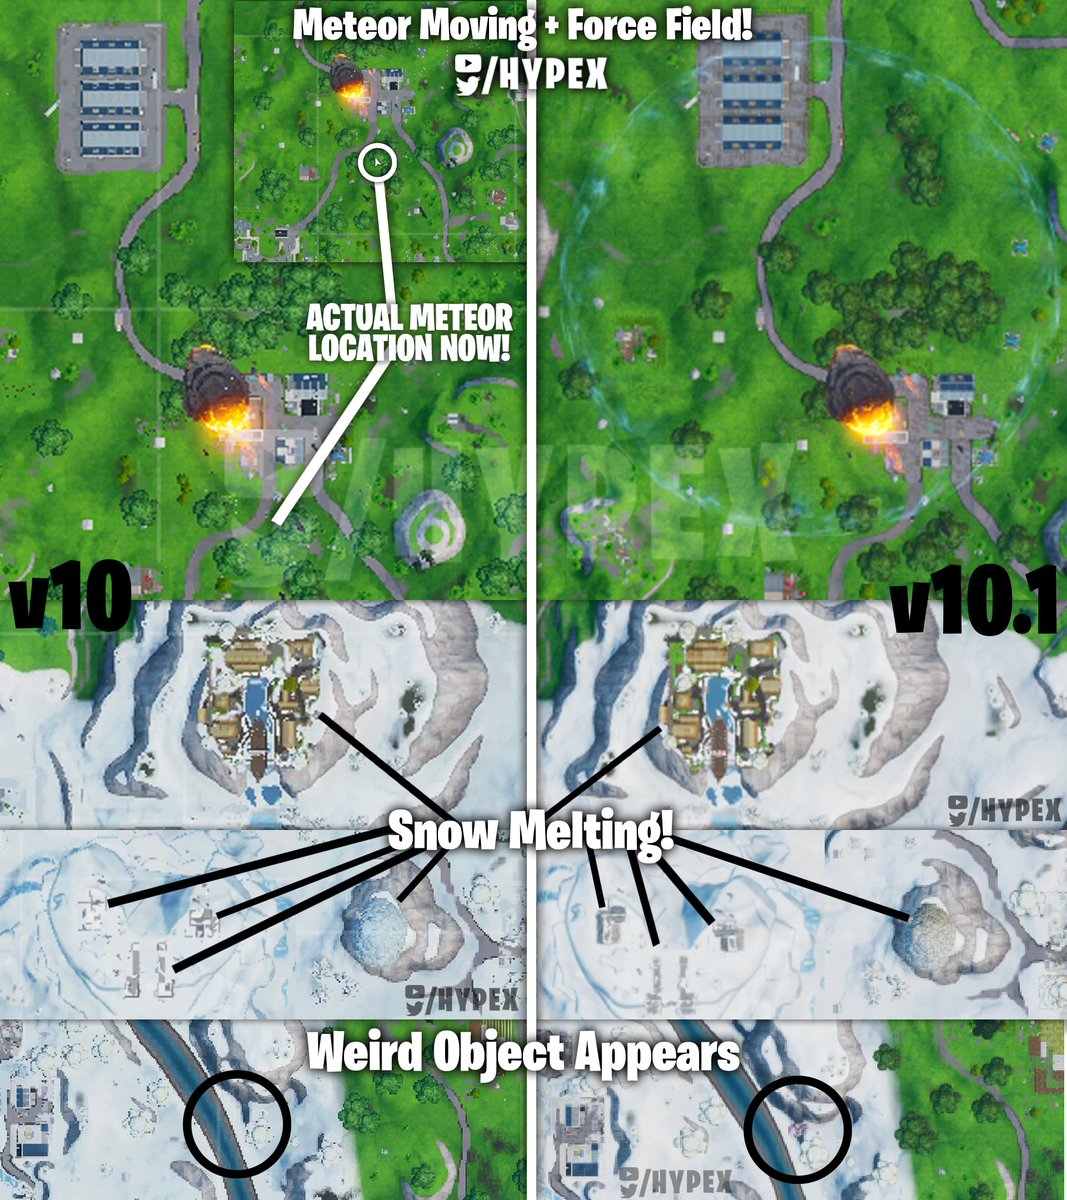 Hypex On Twitter So Here S The Leaked V10 1 Or Higher Map The